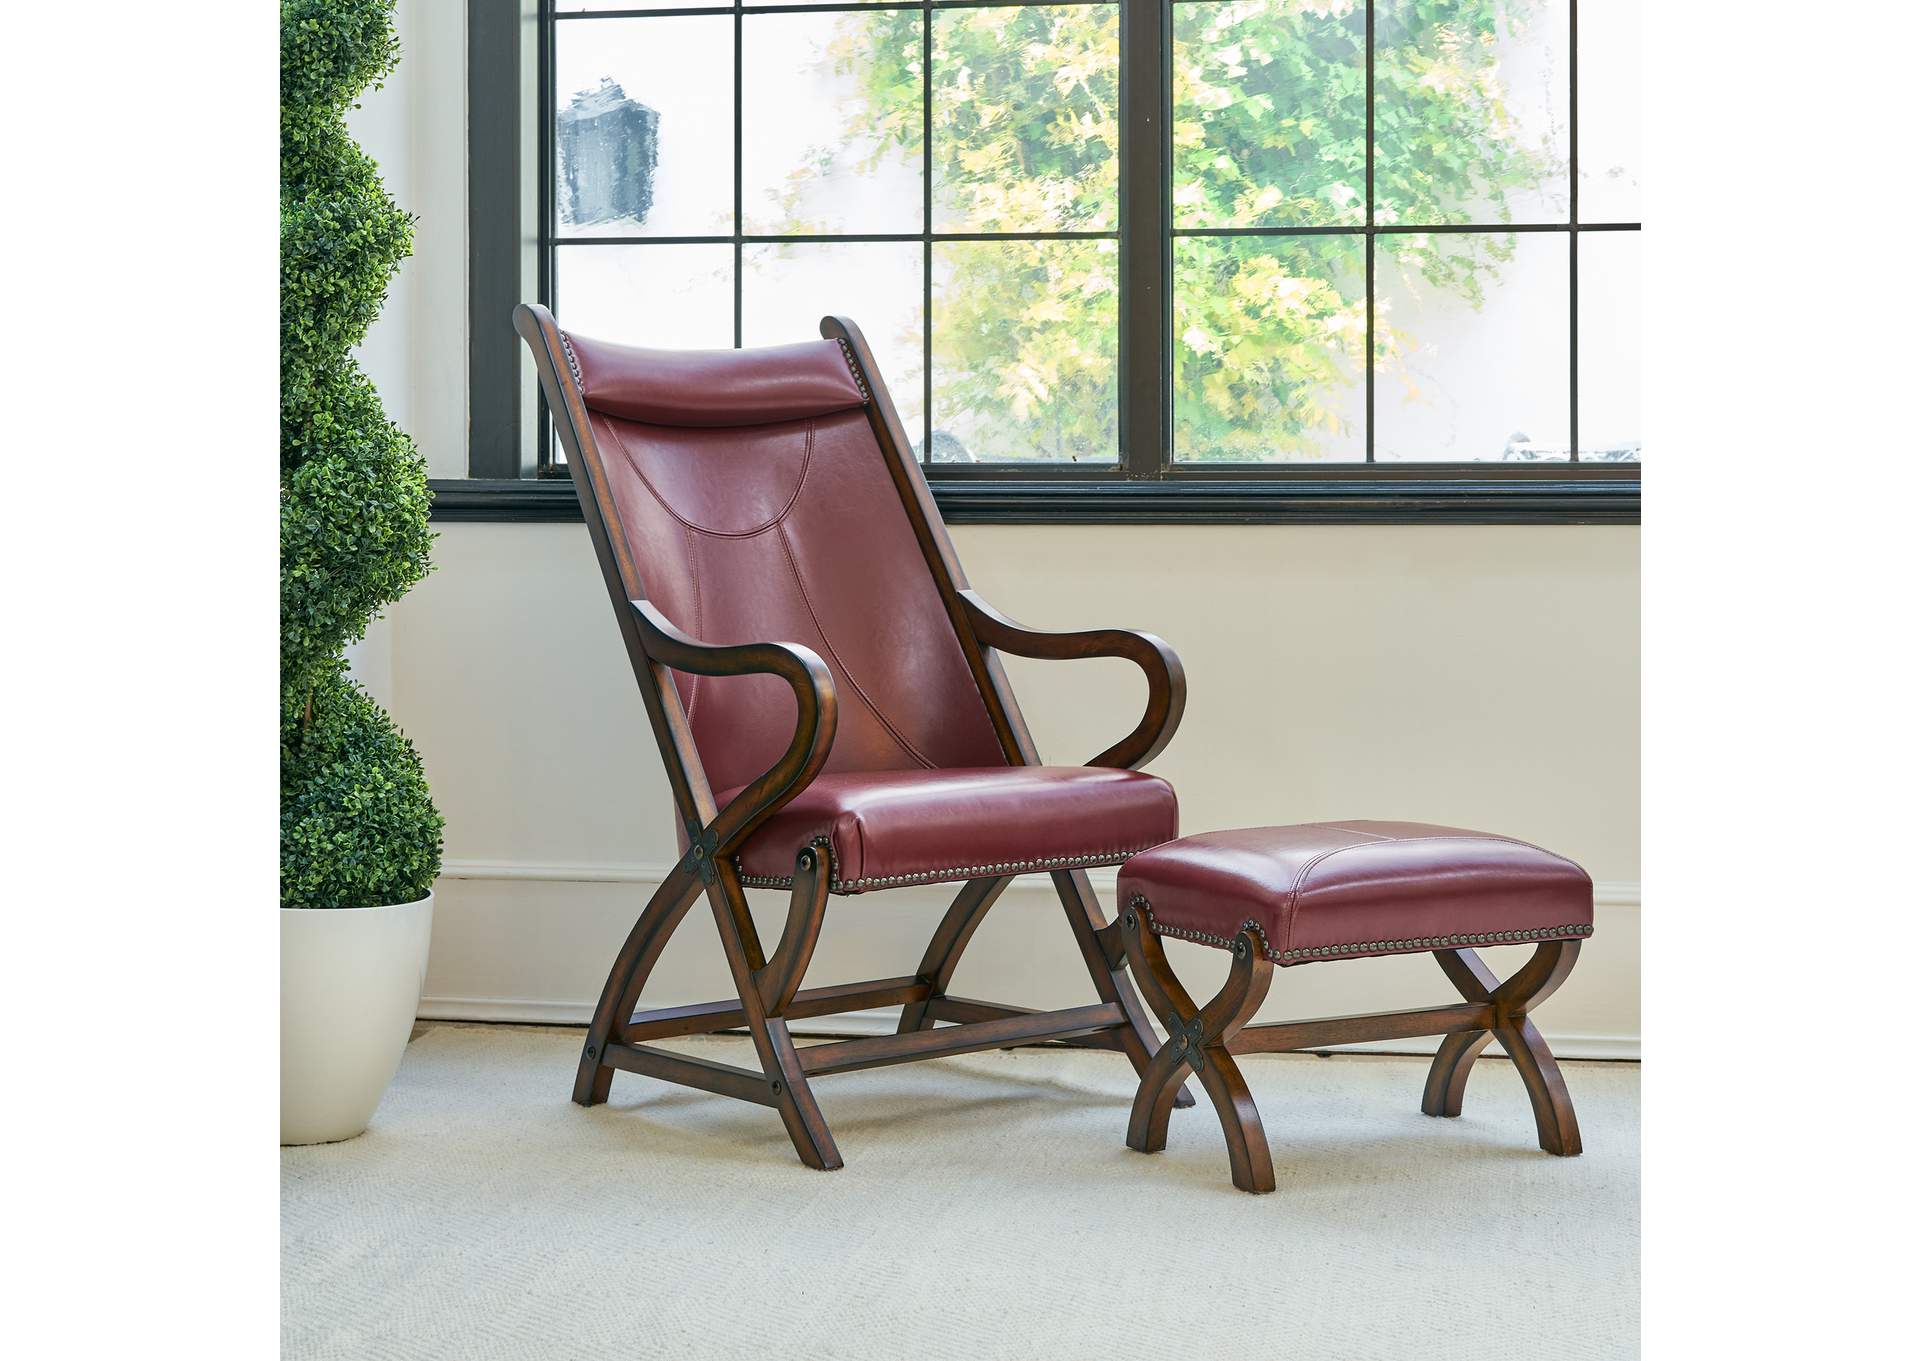 L761 Hunter Chair And Ottoman - Cherry,Elements